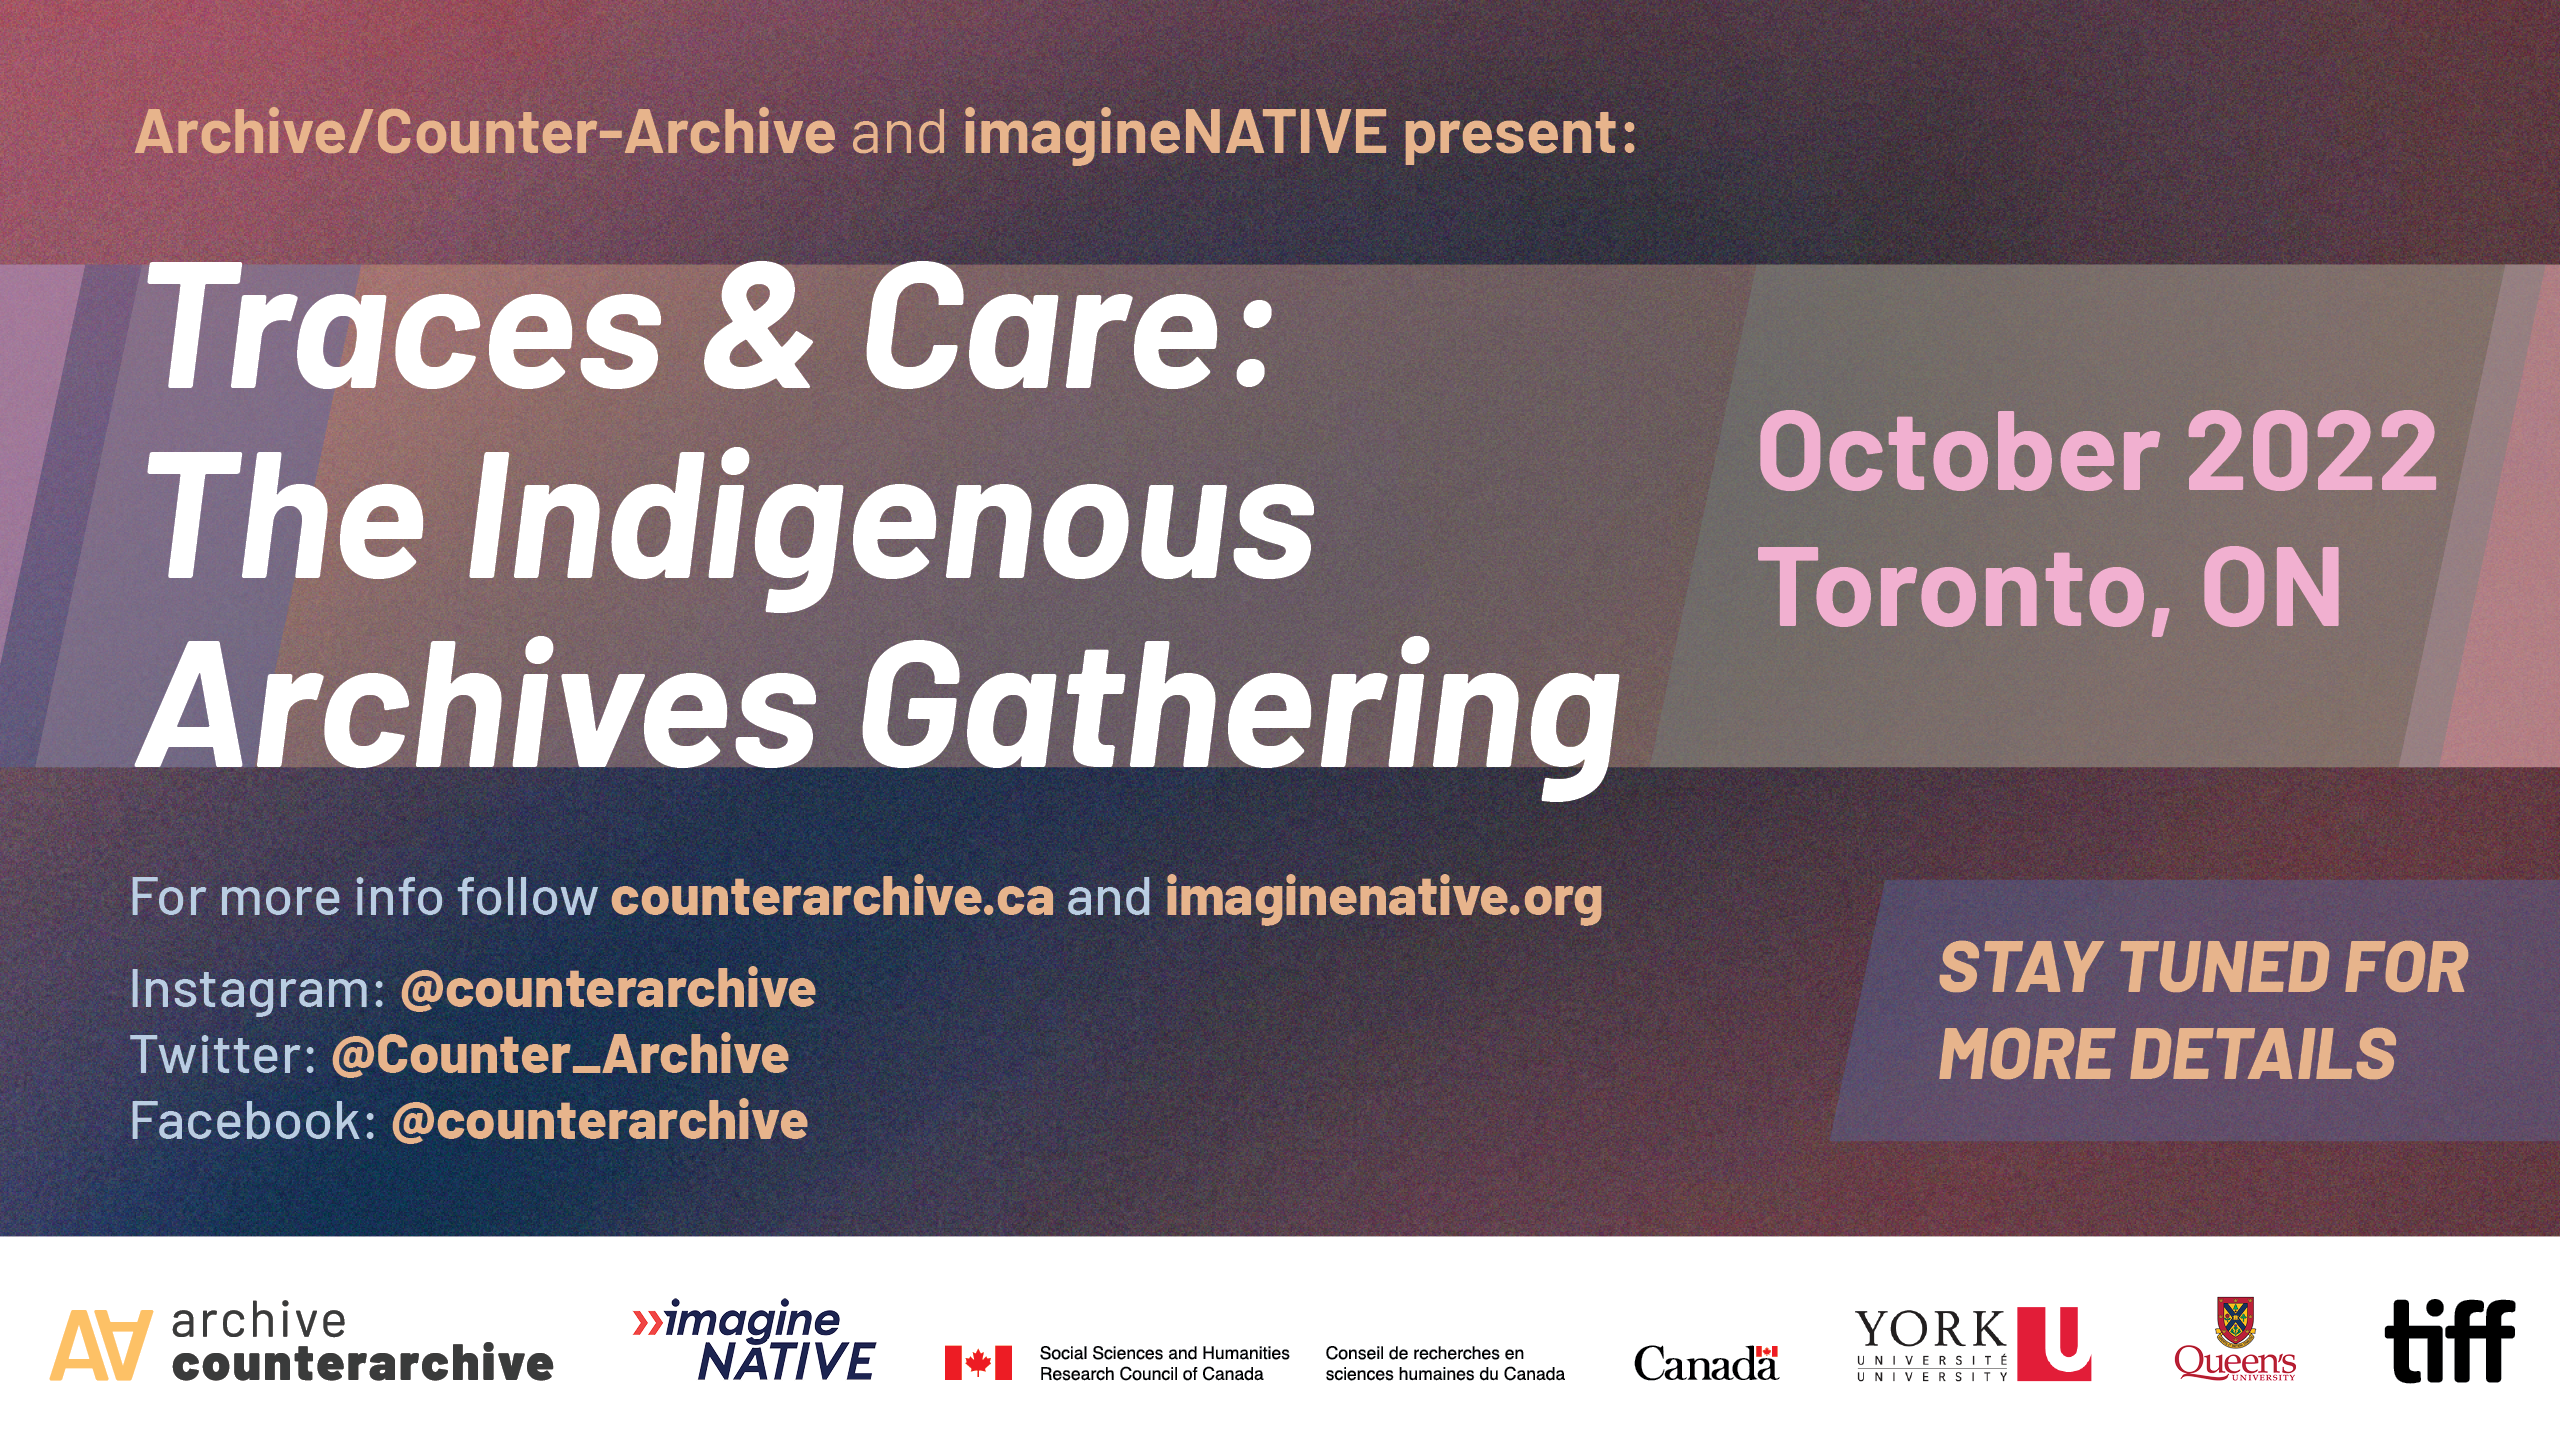 Poster with a maroon background and white text reading "Traces & Care: The Indigenous Archives Gathering. October 2022 Toronto." Logos line the bottom with social media handles for Archive/Counter-Archive.